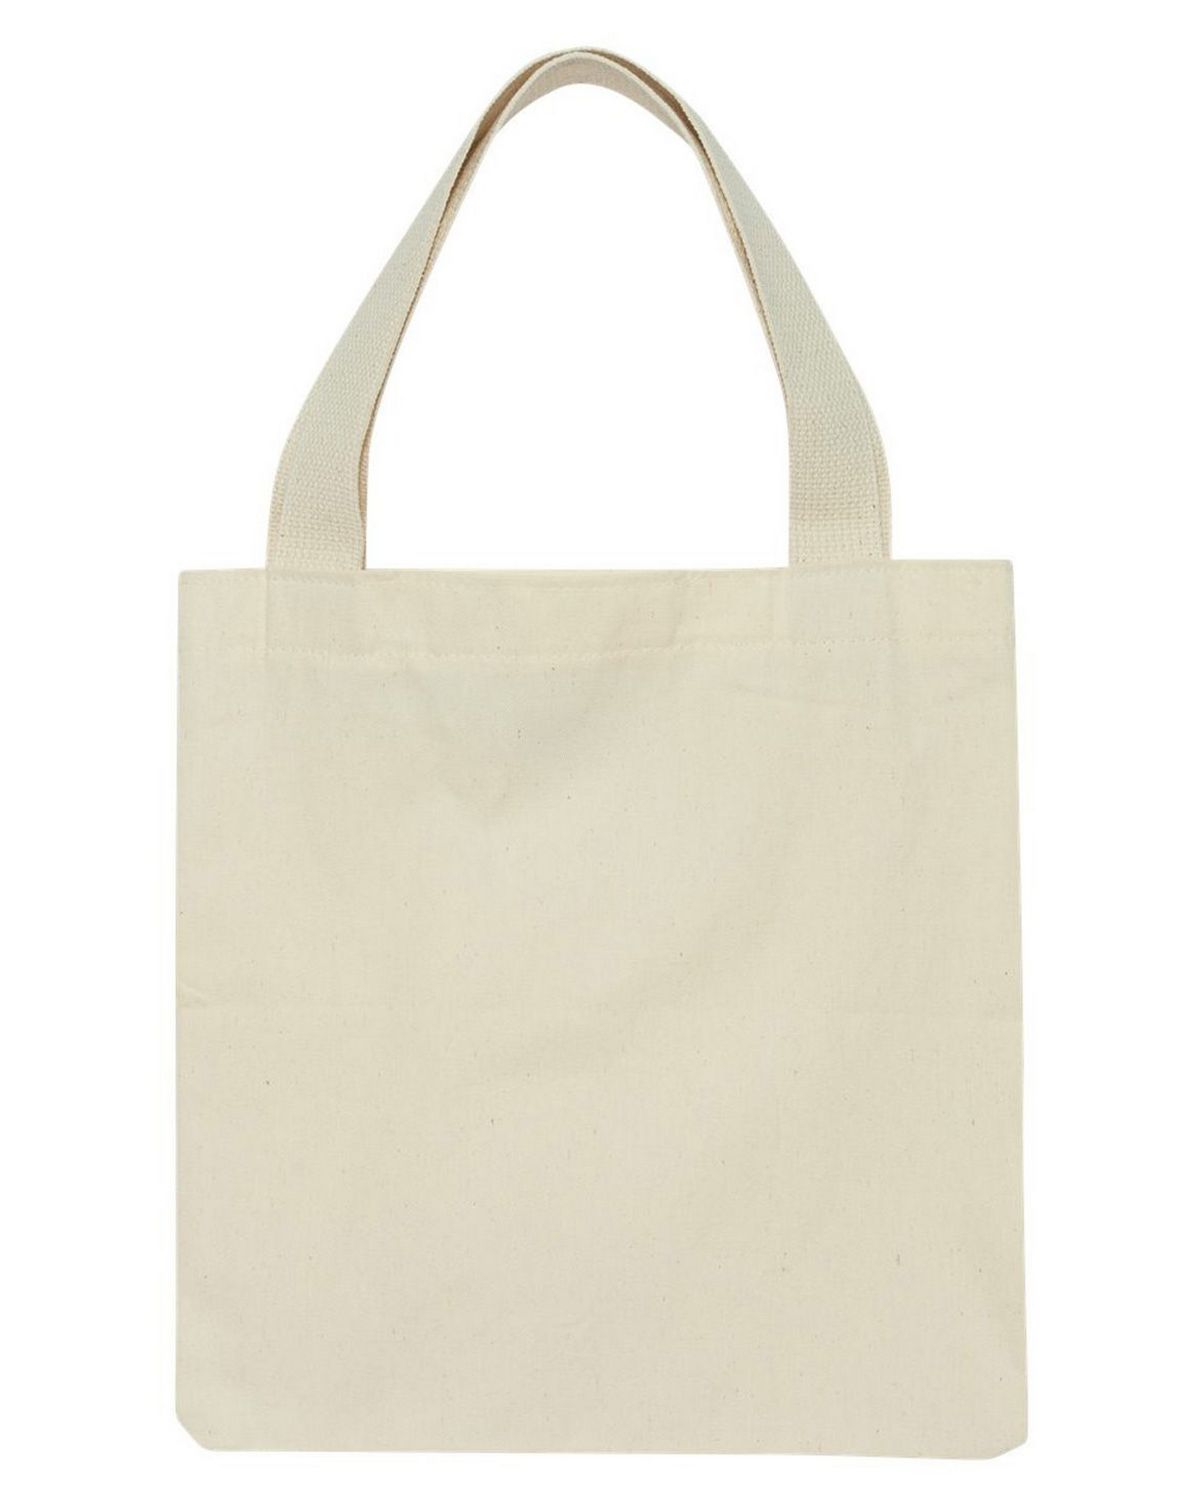 Bayside 800 USA-Made Promotional Tote - Free Shipping Available